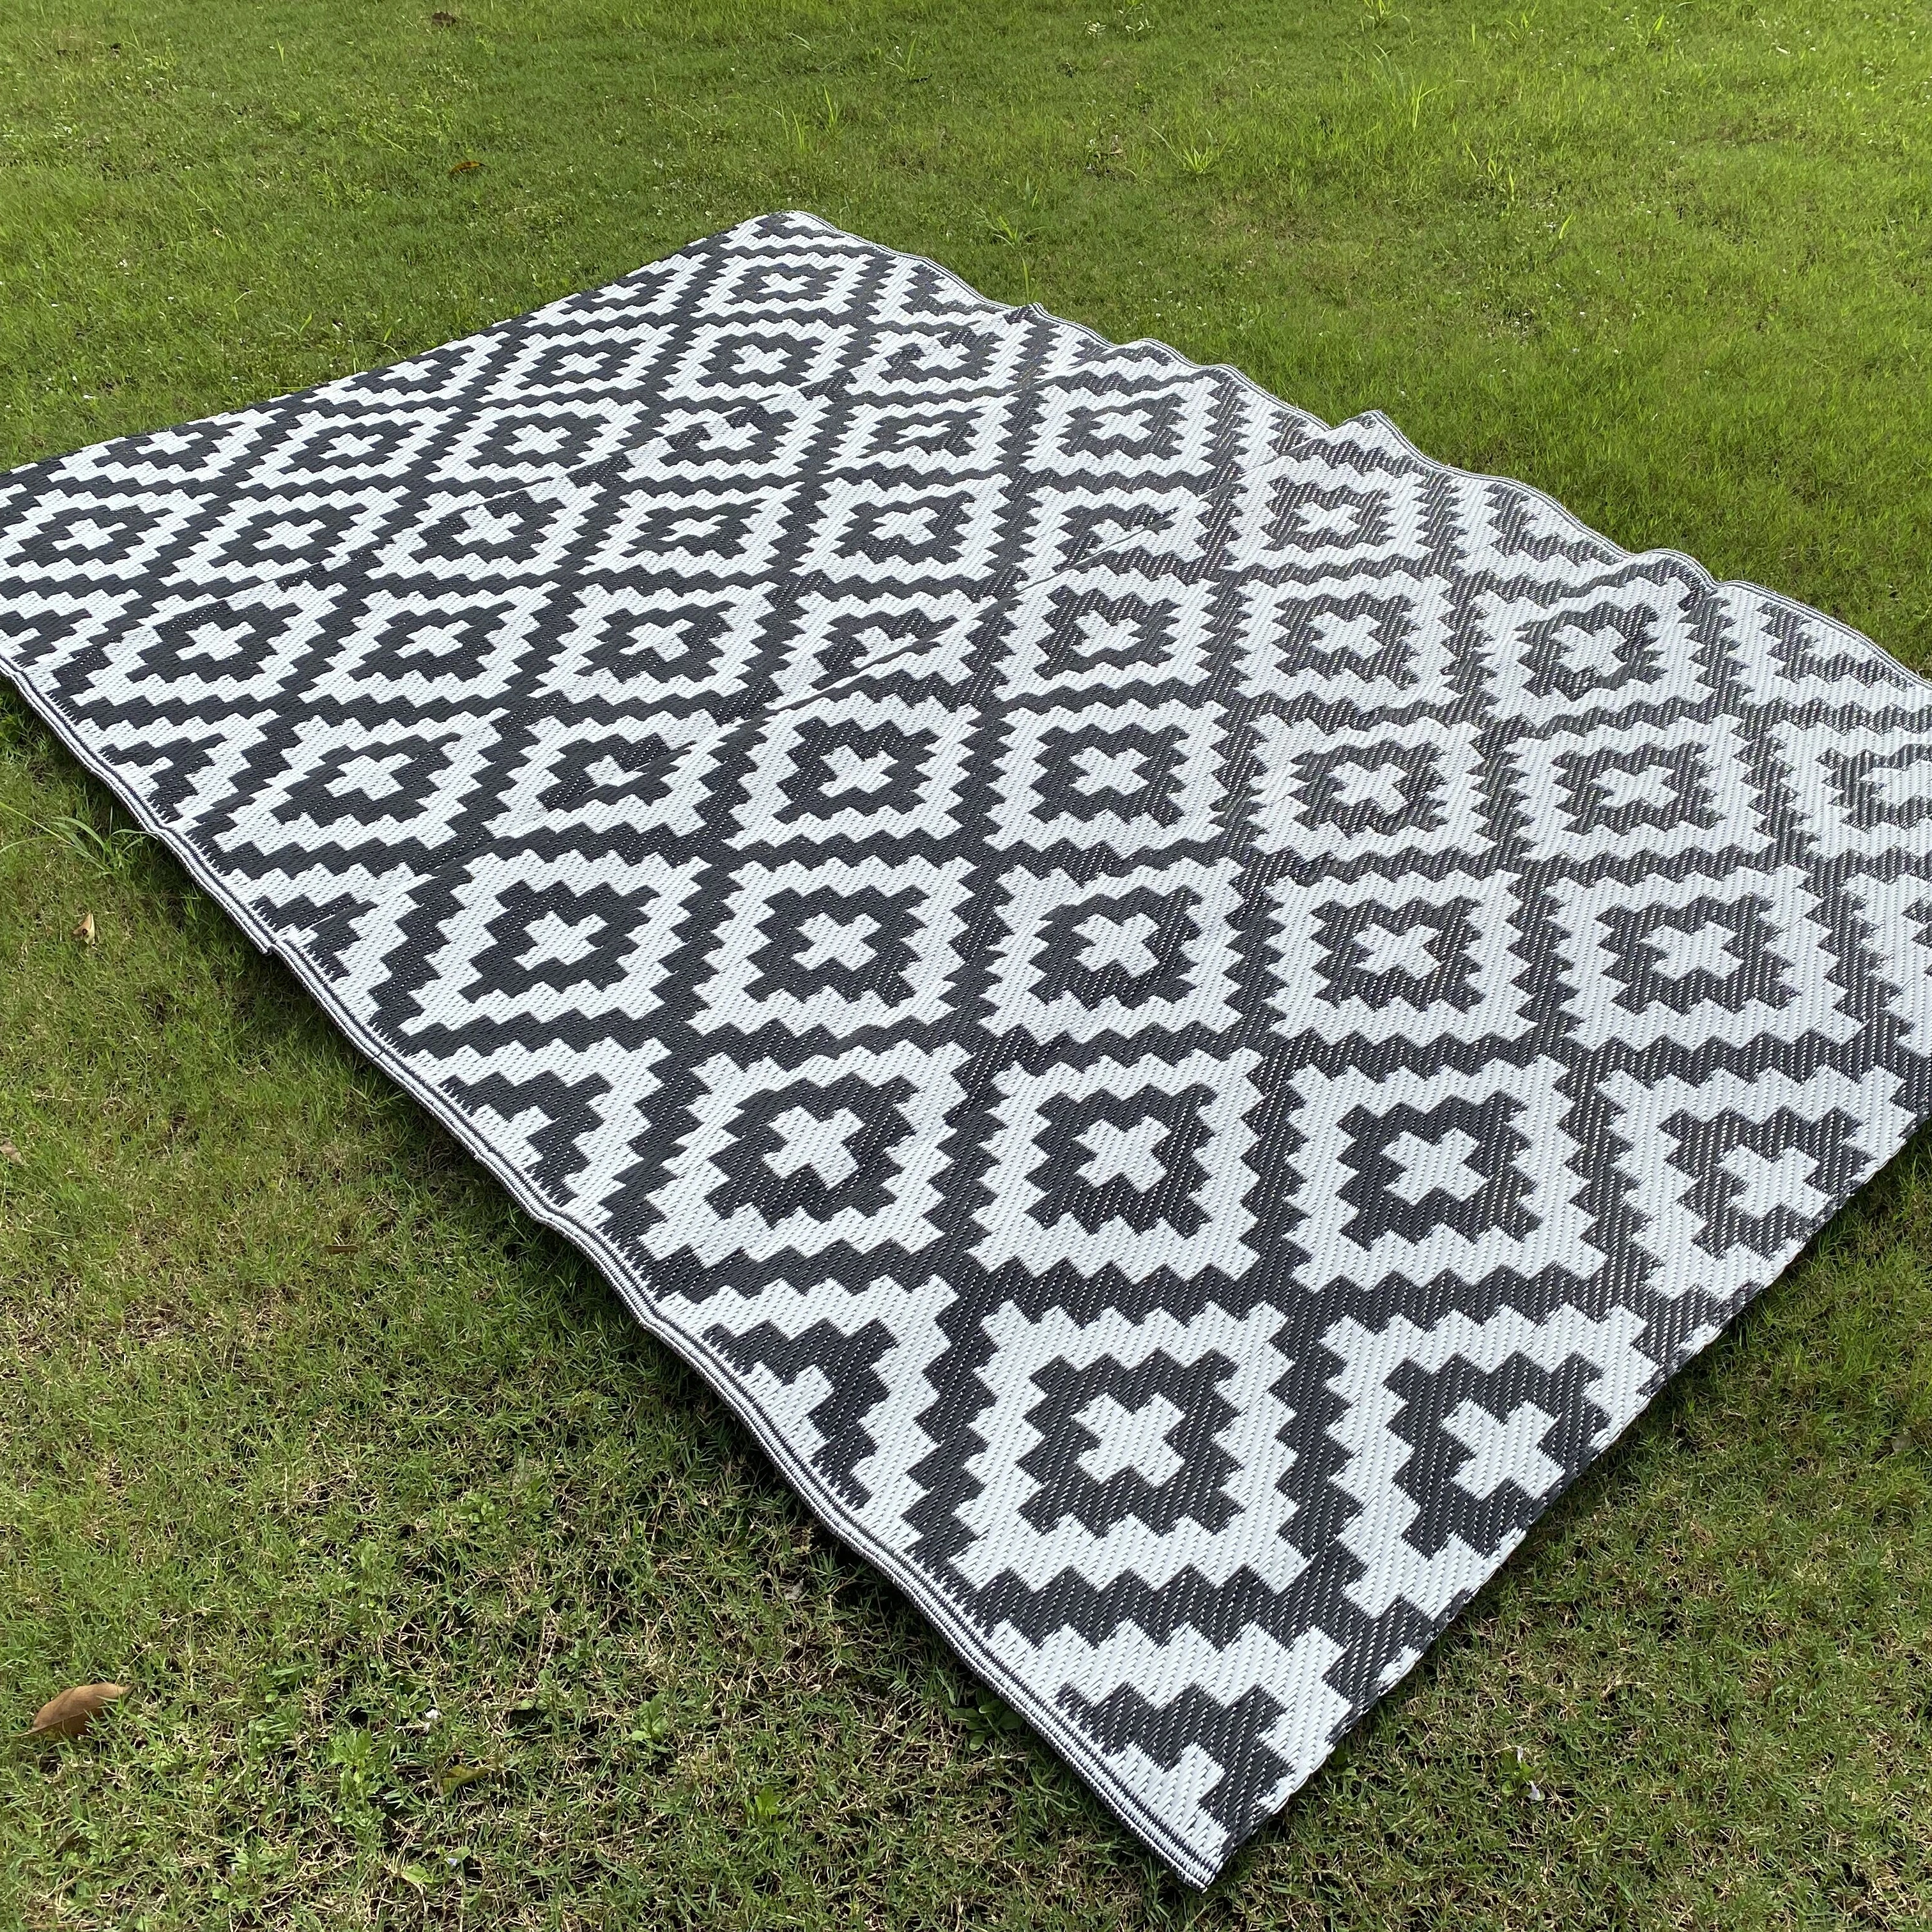 

Black color woven plastic picnic mats woven plastic straw rug RV mat, Any color can be available